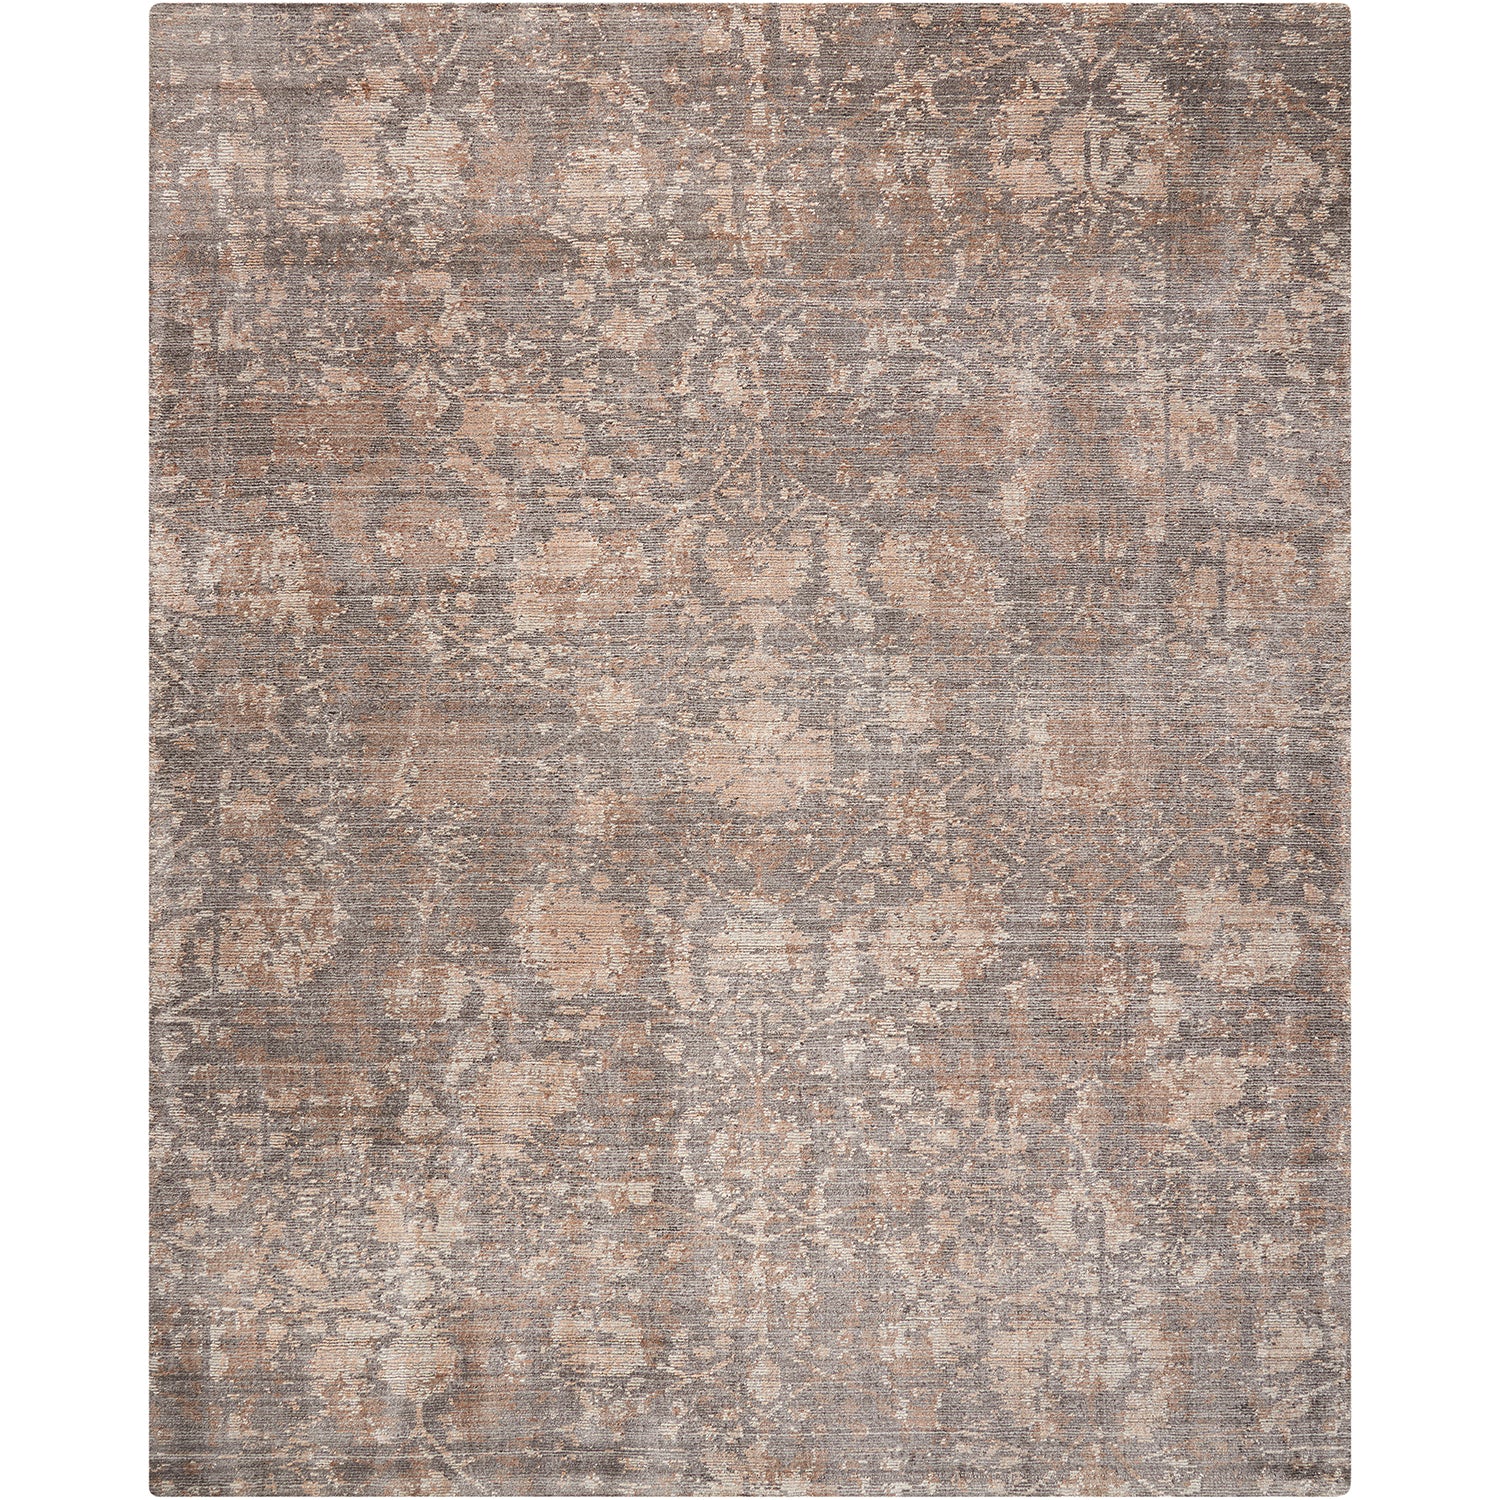 Vintage-inspired rectangular area rug with faded floral pattern in muted tones.